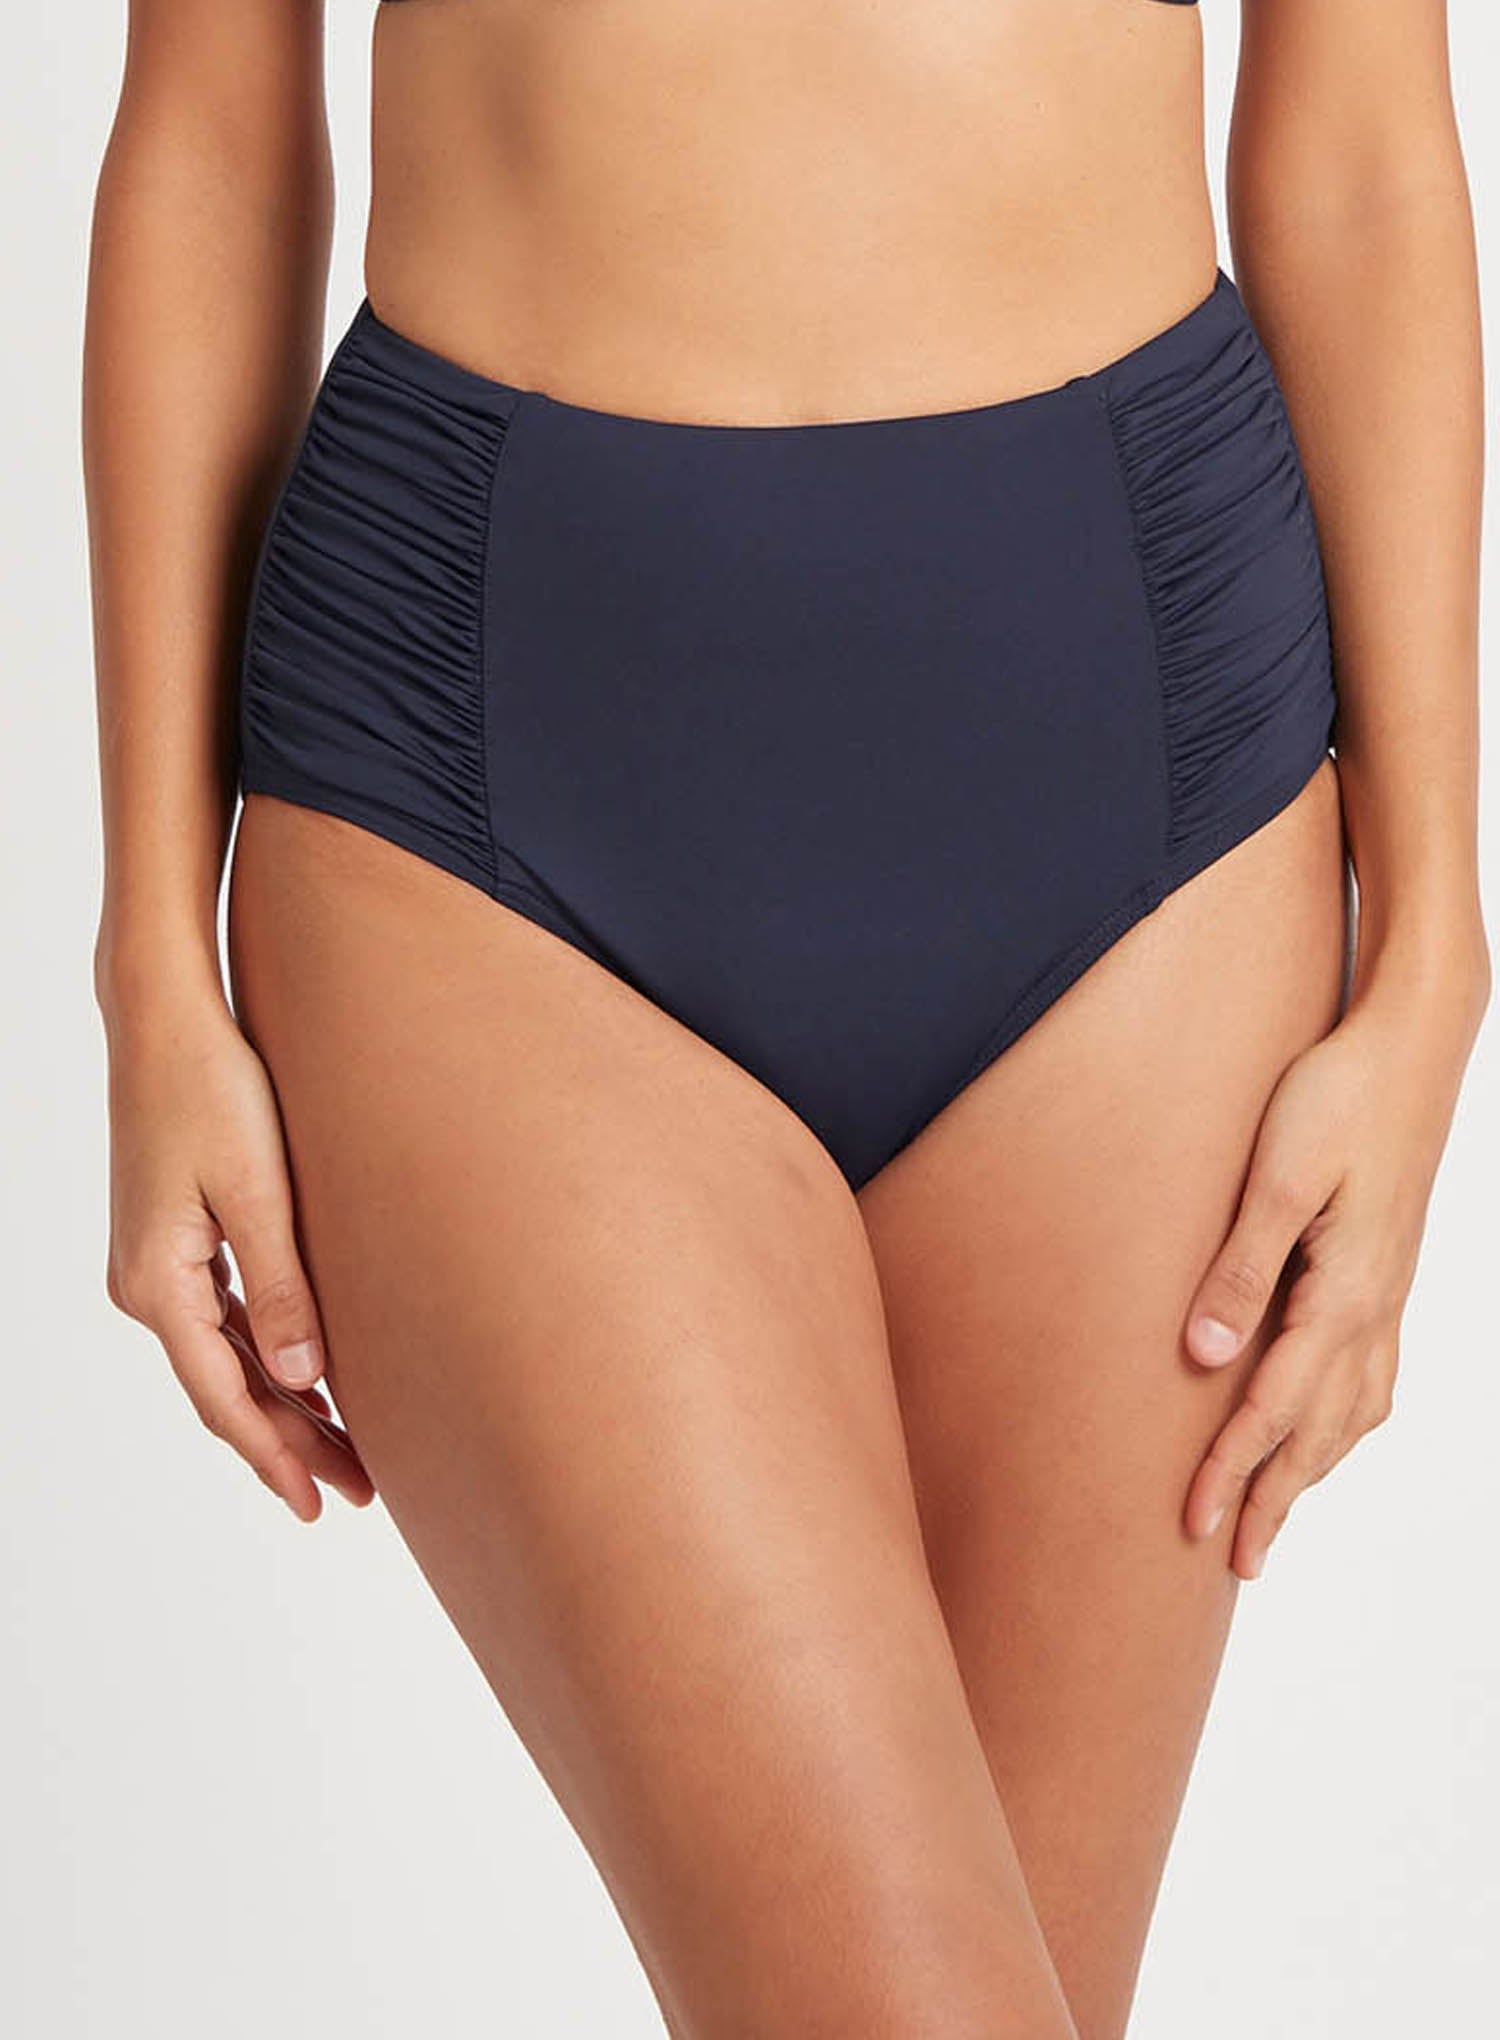 FITS EVERYBODY MATERNITY BANDED HIGH-WAISTED BRIEF